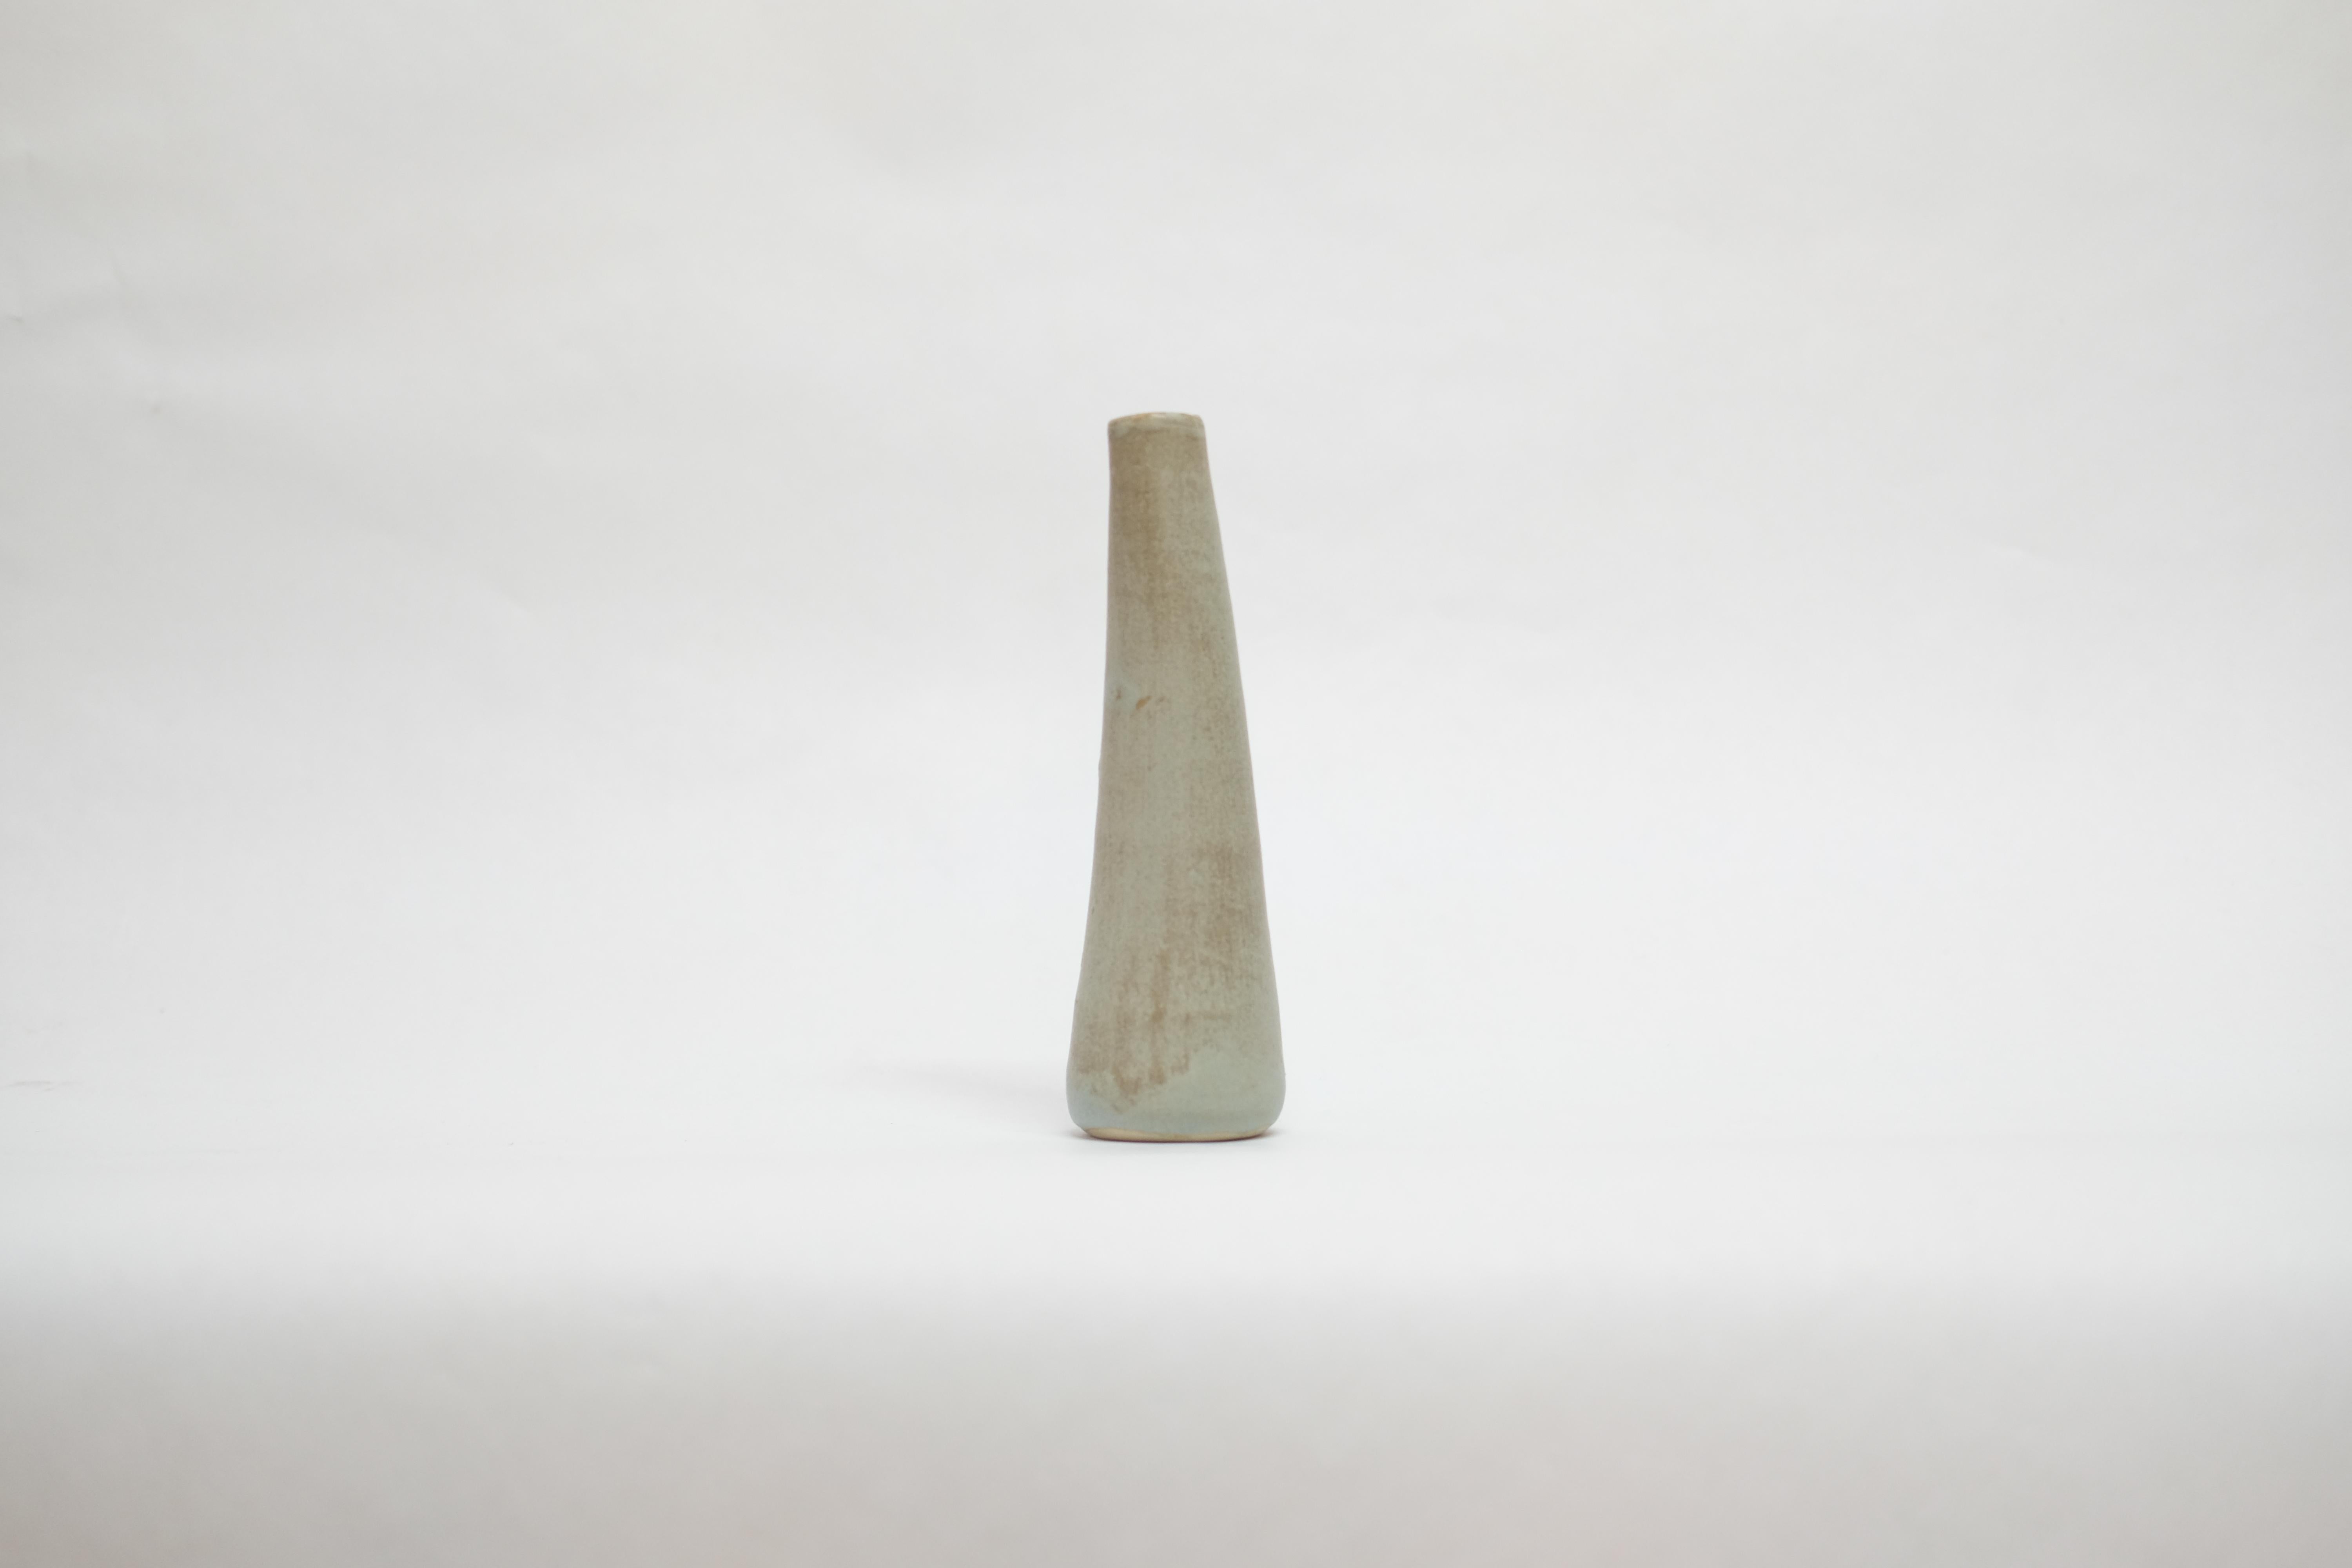 Solitario Stoneware Vase by Camila Apaez
One of a kind
Materials: Stoneware
Dimensions: 7 X 7 X 19 cm
Options: White Bone, Stone Sage, Artichoke green (while supplies last), Buttermilk, please contact us.

This year has been shaped by the